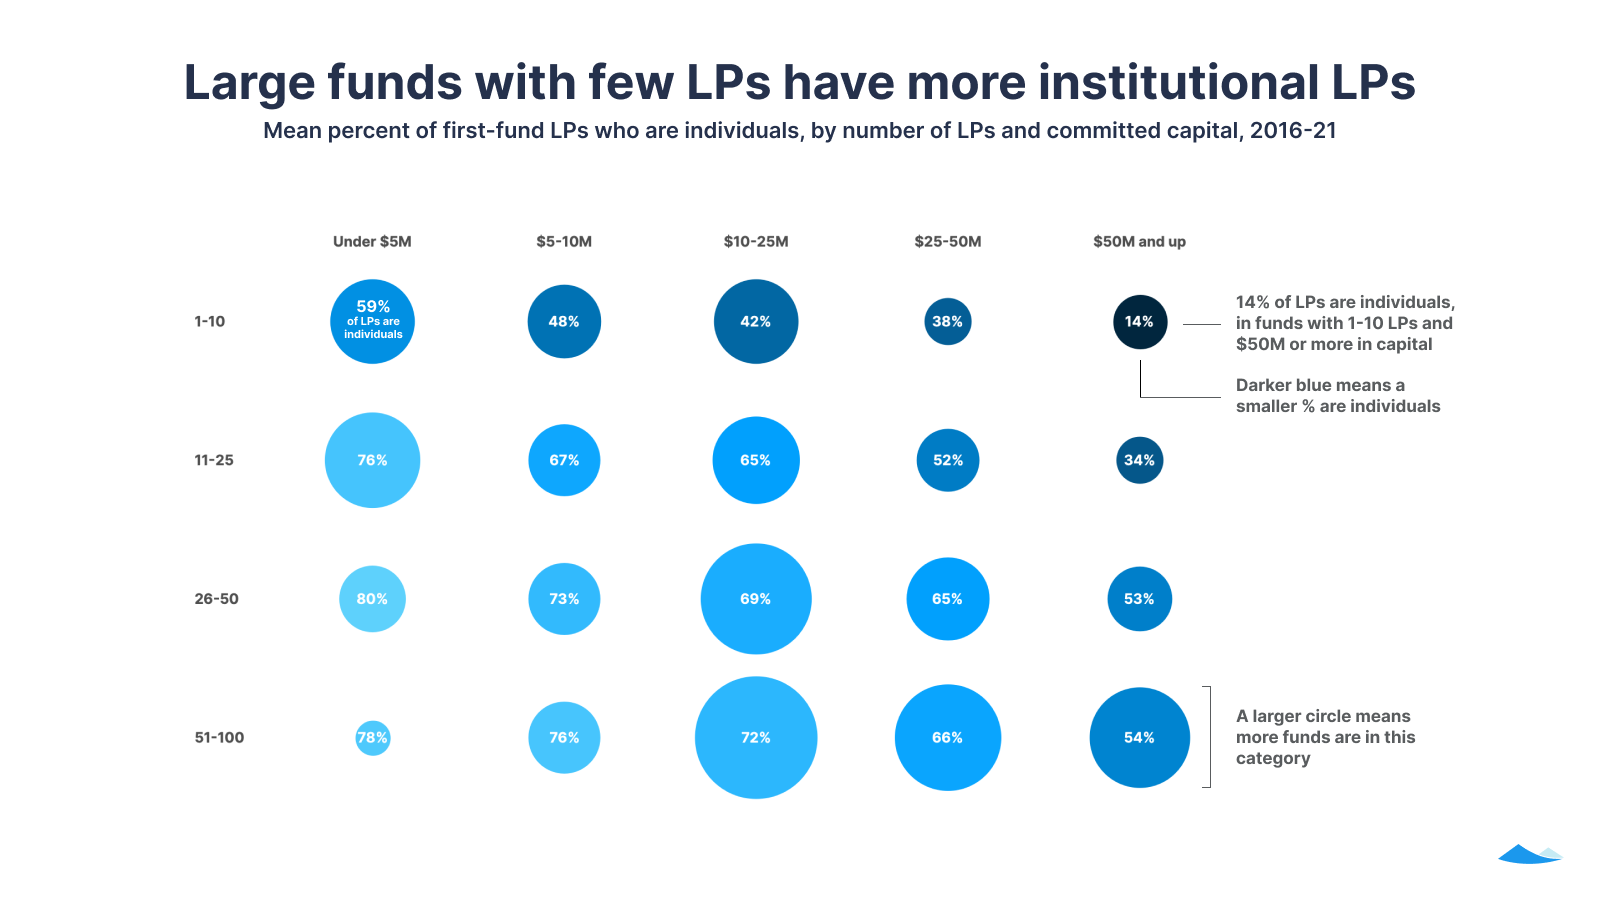 Large funds with few LPs have more institutional LPs: Mean percent of first fund LPs who are individuals, by number of LPs and committed capital, 2016-21